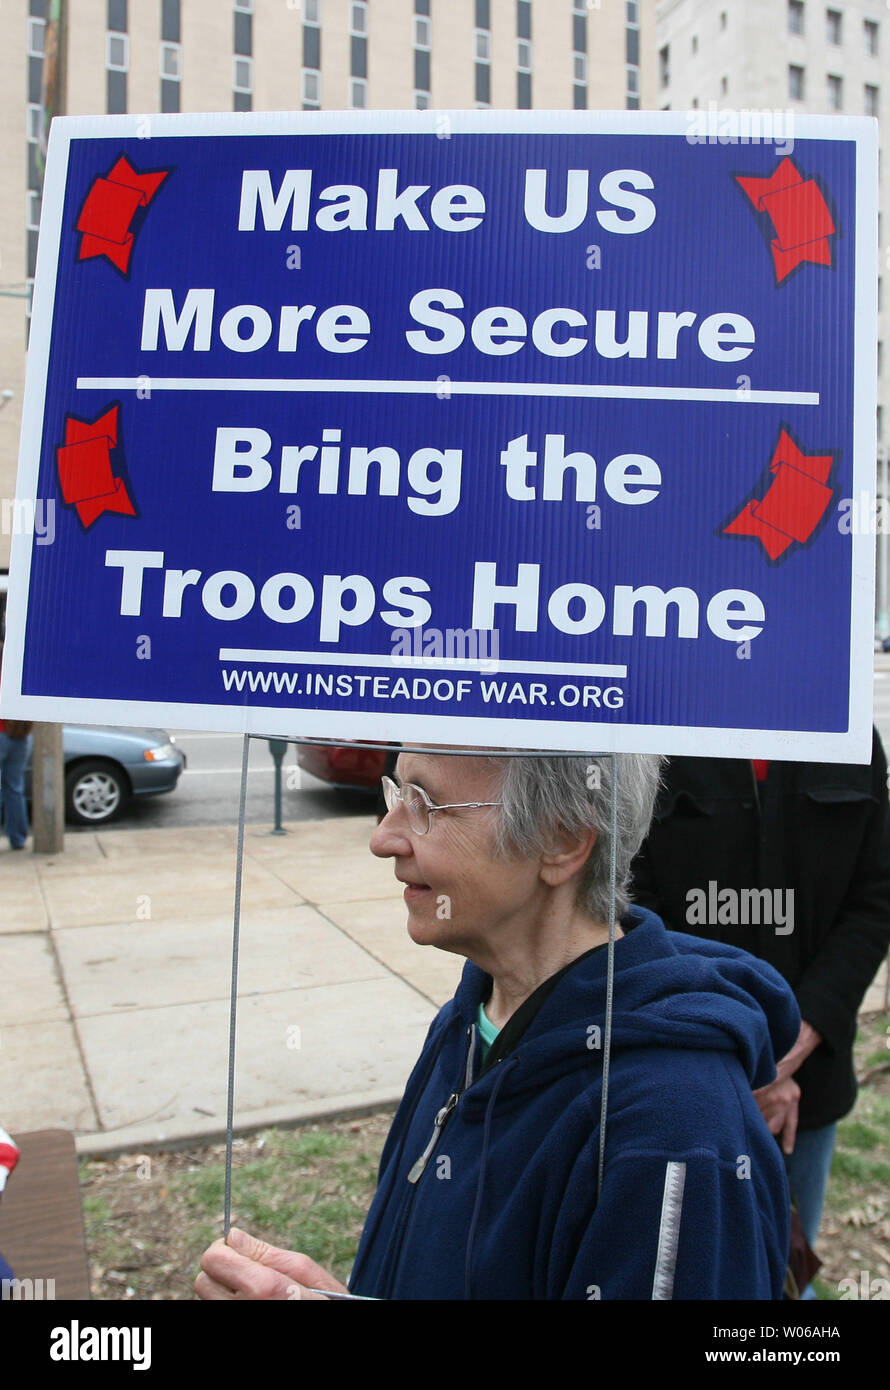 War protestor Mary Weller of Webster Groves, Missouri holds a sign before taking part in a peaceful march through the streets of downtown St. Louis during the fourth anniversary of the Iraq war in St. Louis on March 19, 2007. (UPI Photo/Bill Greenblatt) Stock Photo